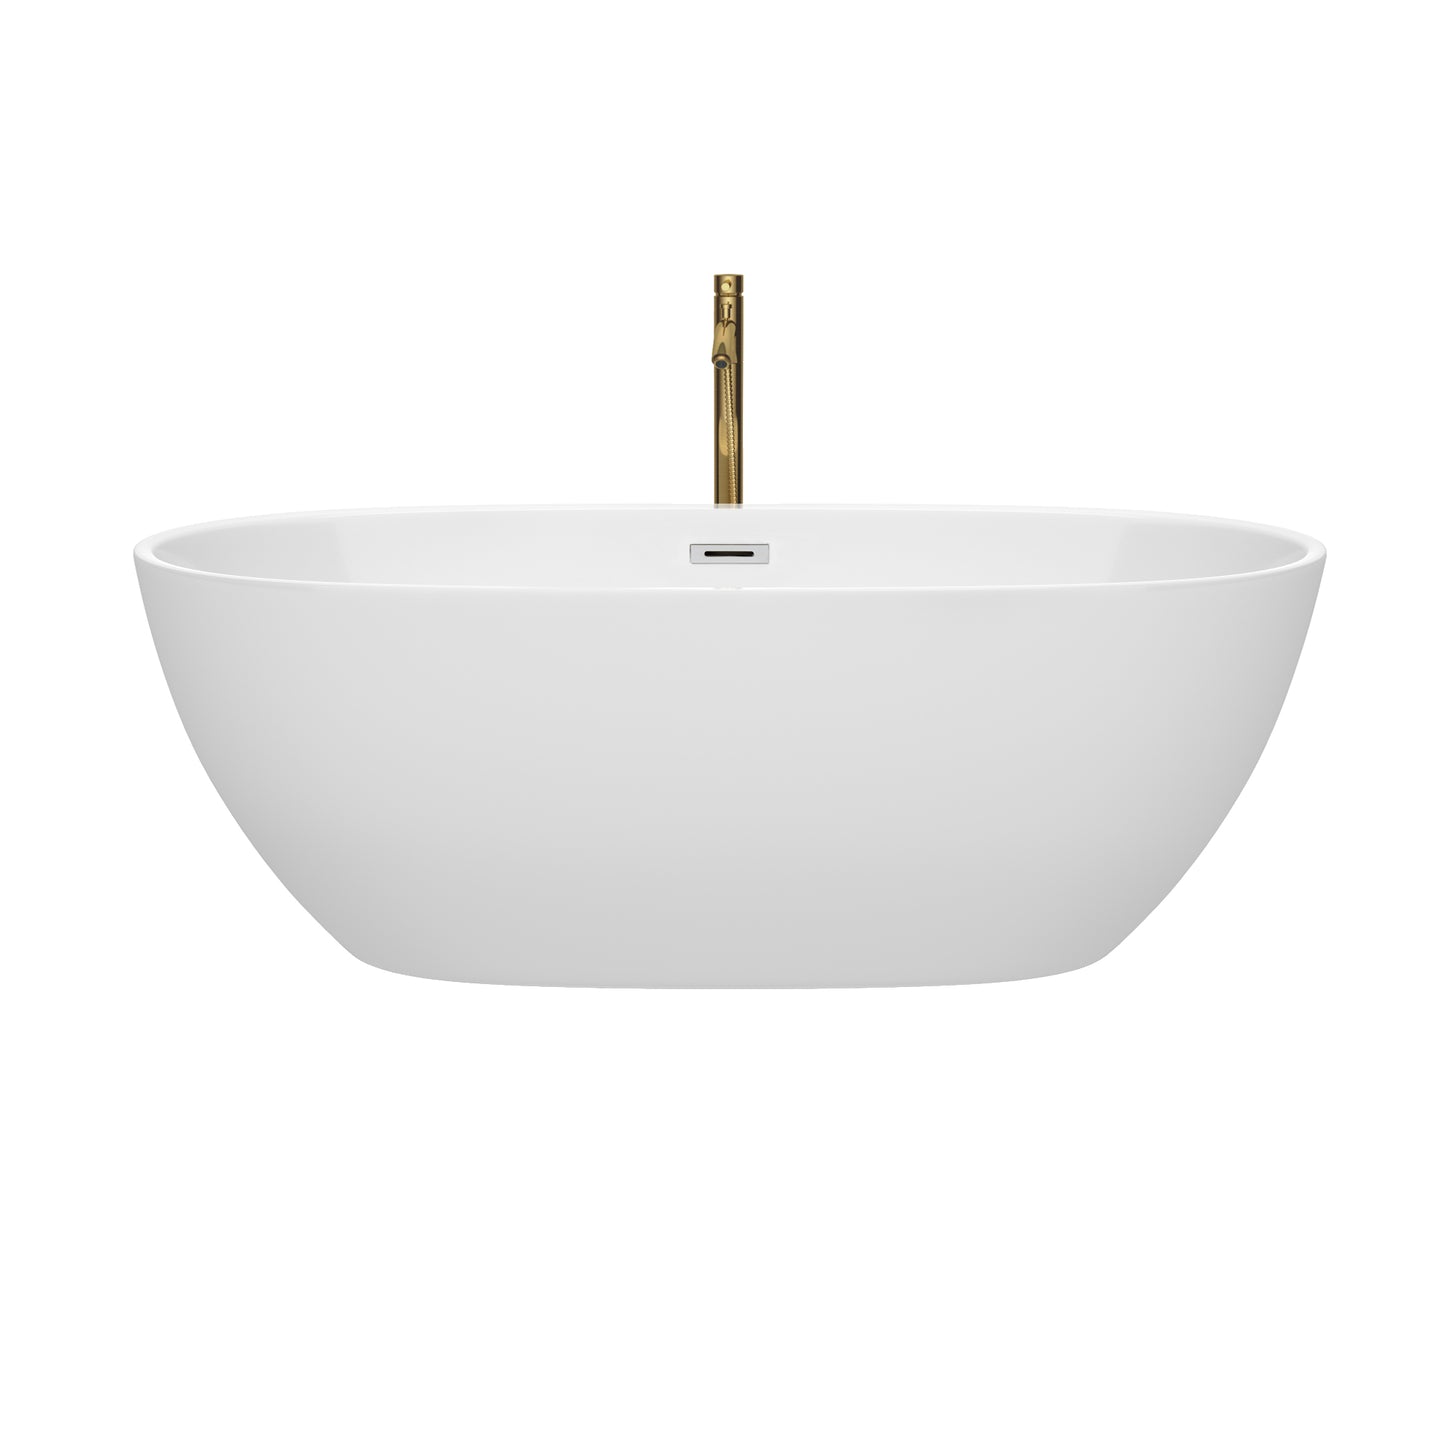 Wyndham Collection Juno 67 Inch Freestanding Bathtub in White with Floor Mounted Faucet, Drain and Overflow Trim - Luxe Bathroom Vanities